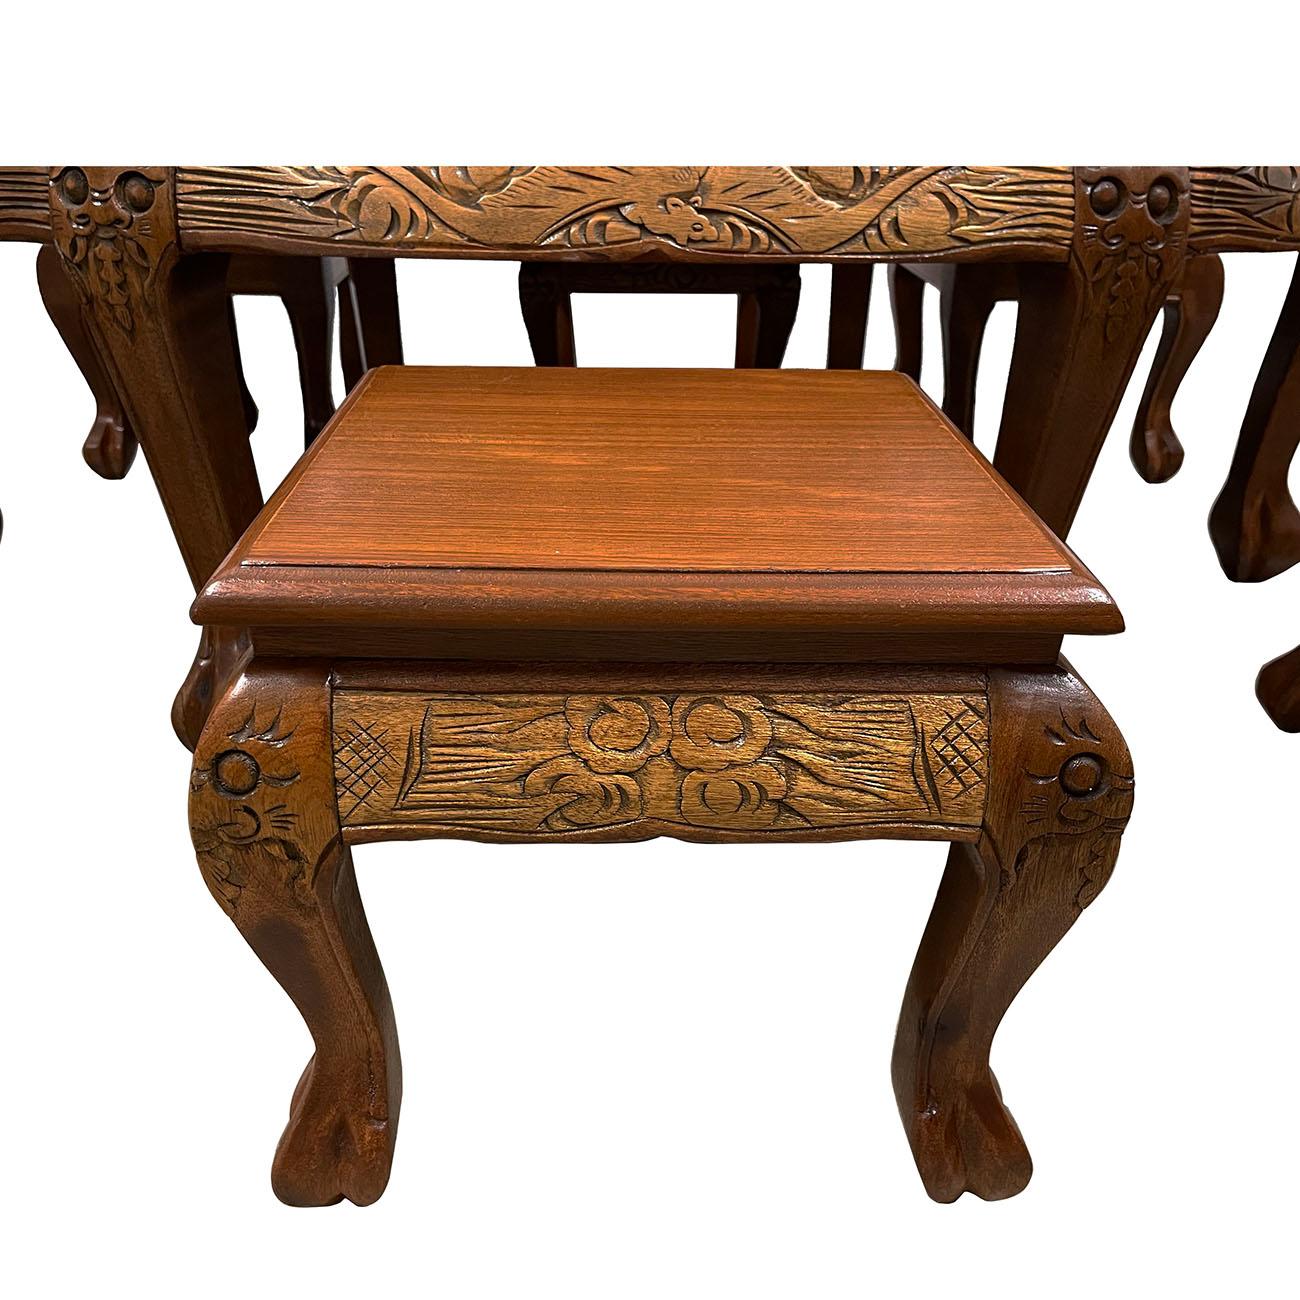 20th Century Vintage Chinese Massive Carved Teak Wood Coffee Table with 6 Nesting Stools